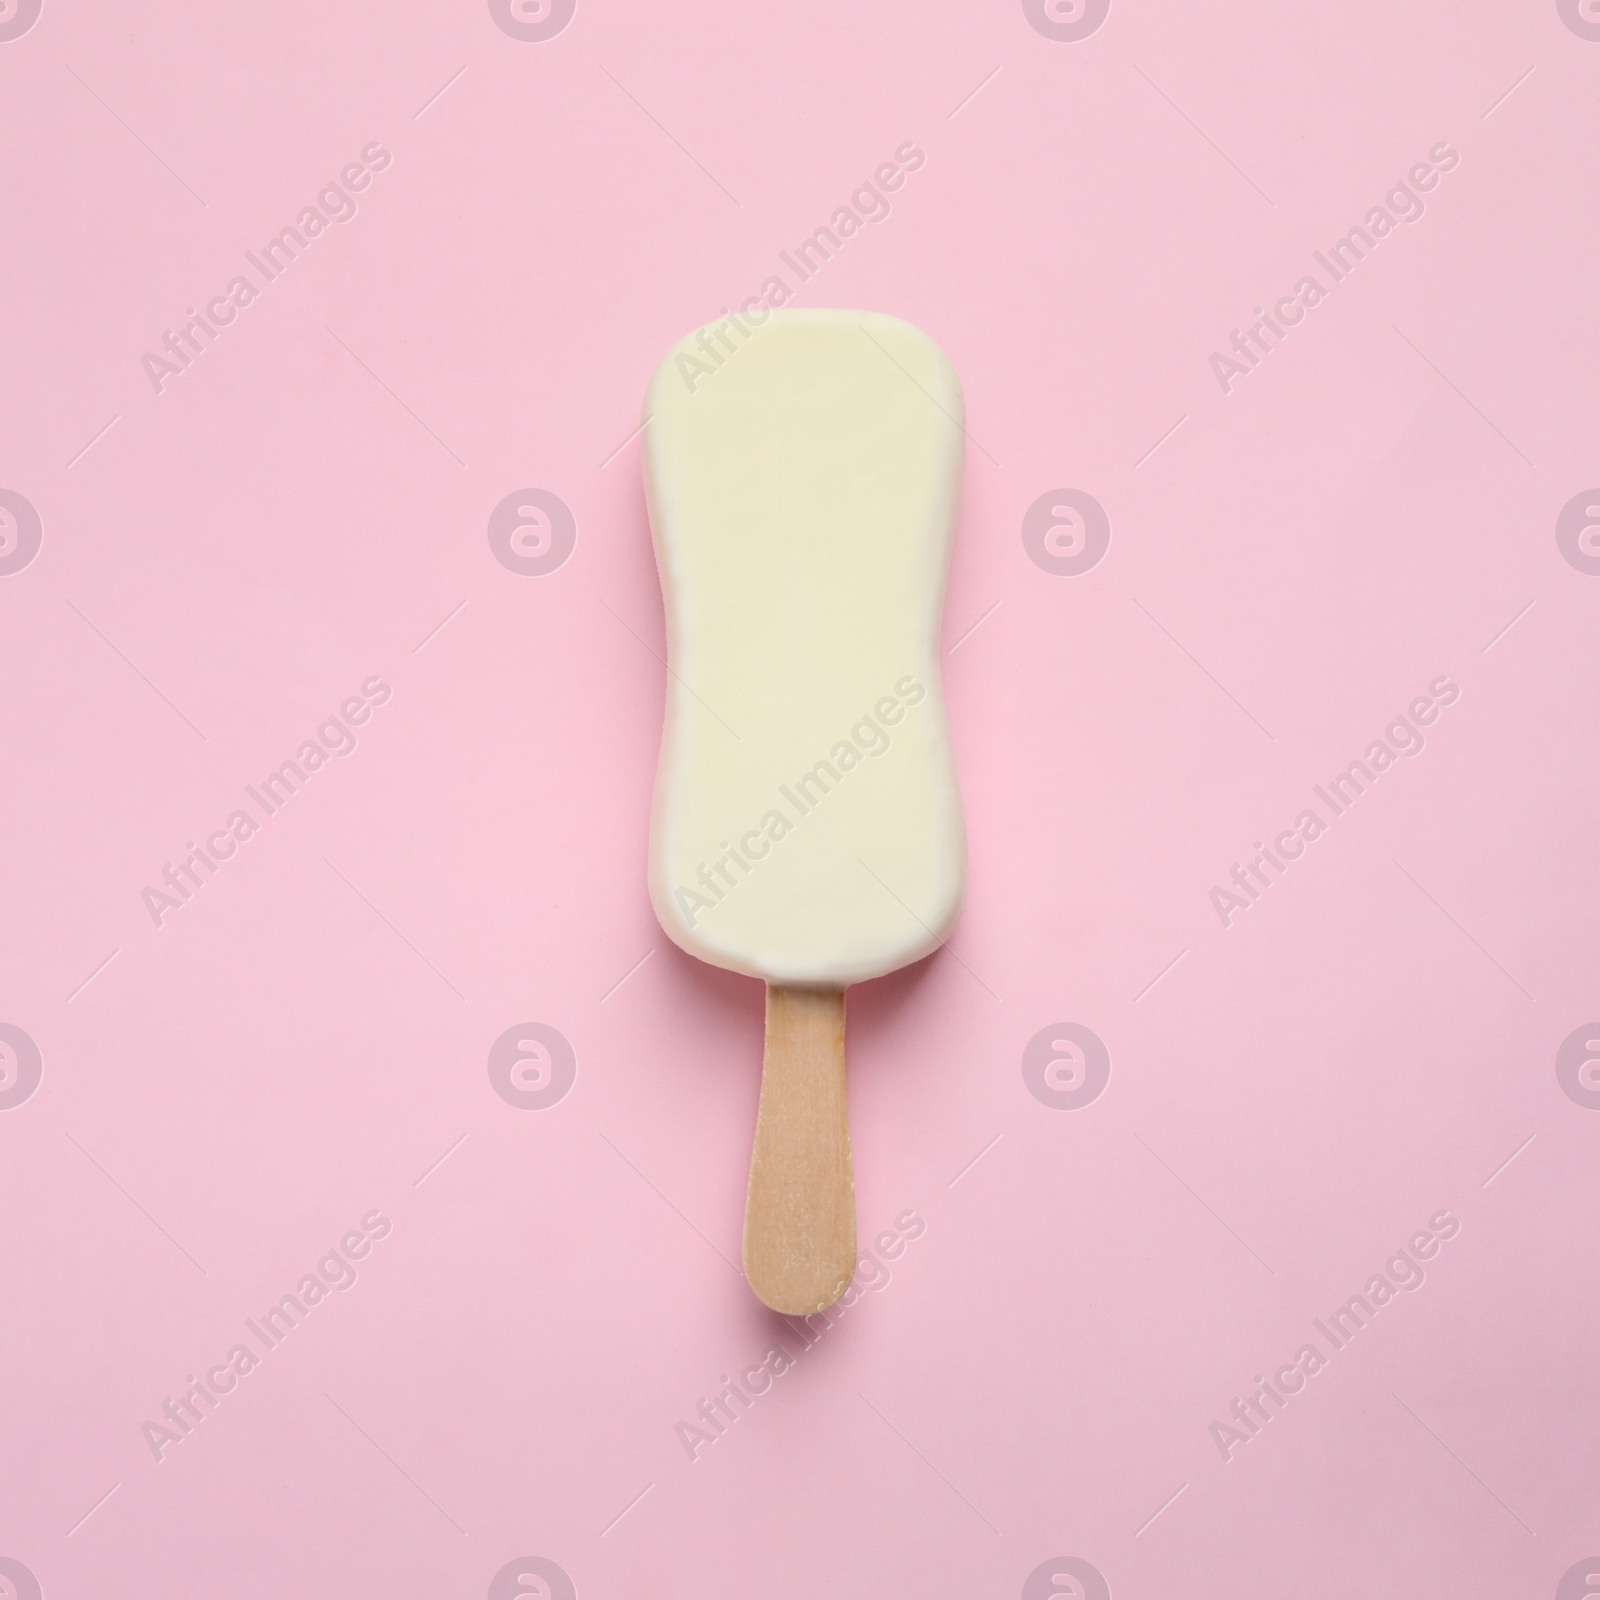 Photo of Ice cream with glaze on pink background, top view